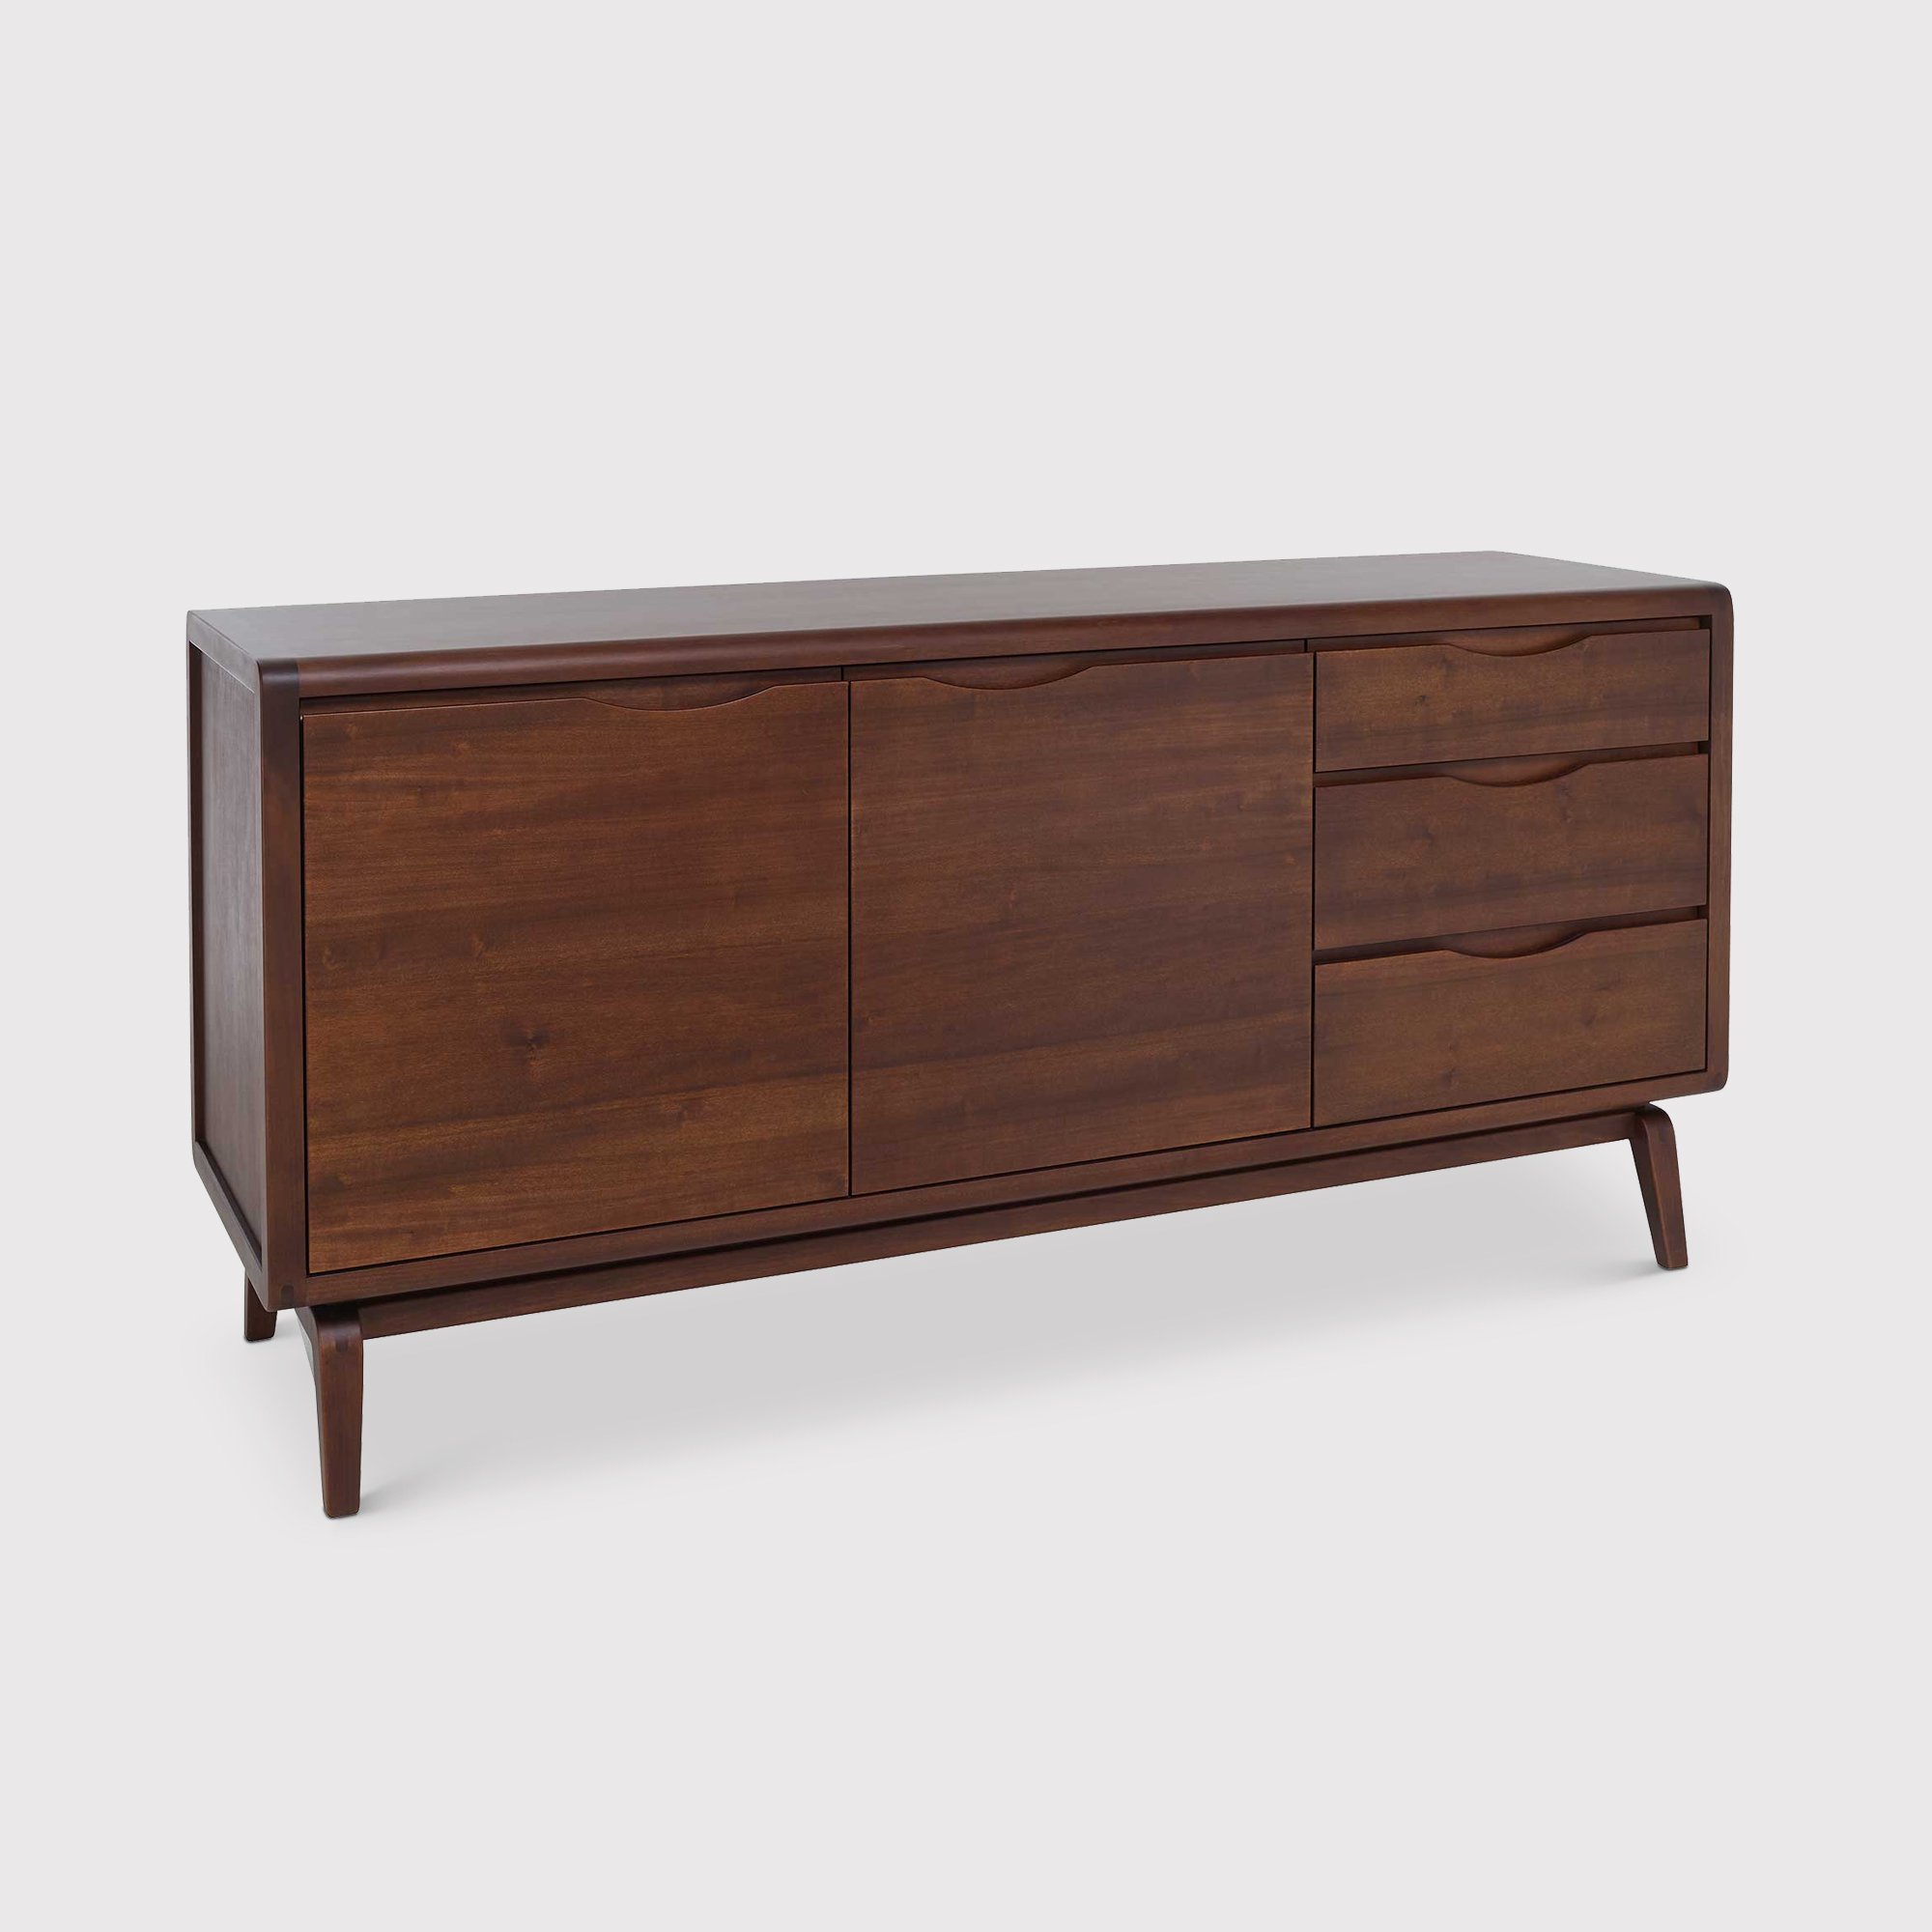 Ercol Lugo Large Sideboard, Brown | Barker & Stonehouse